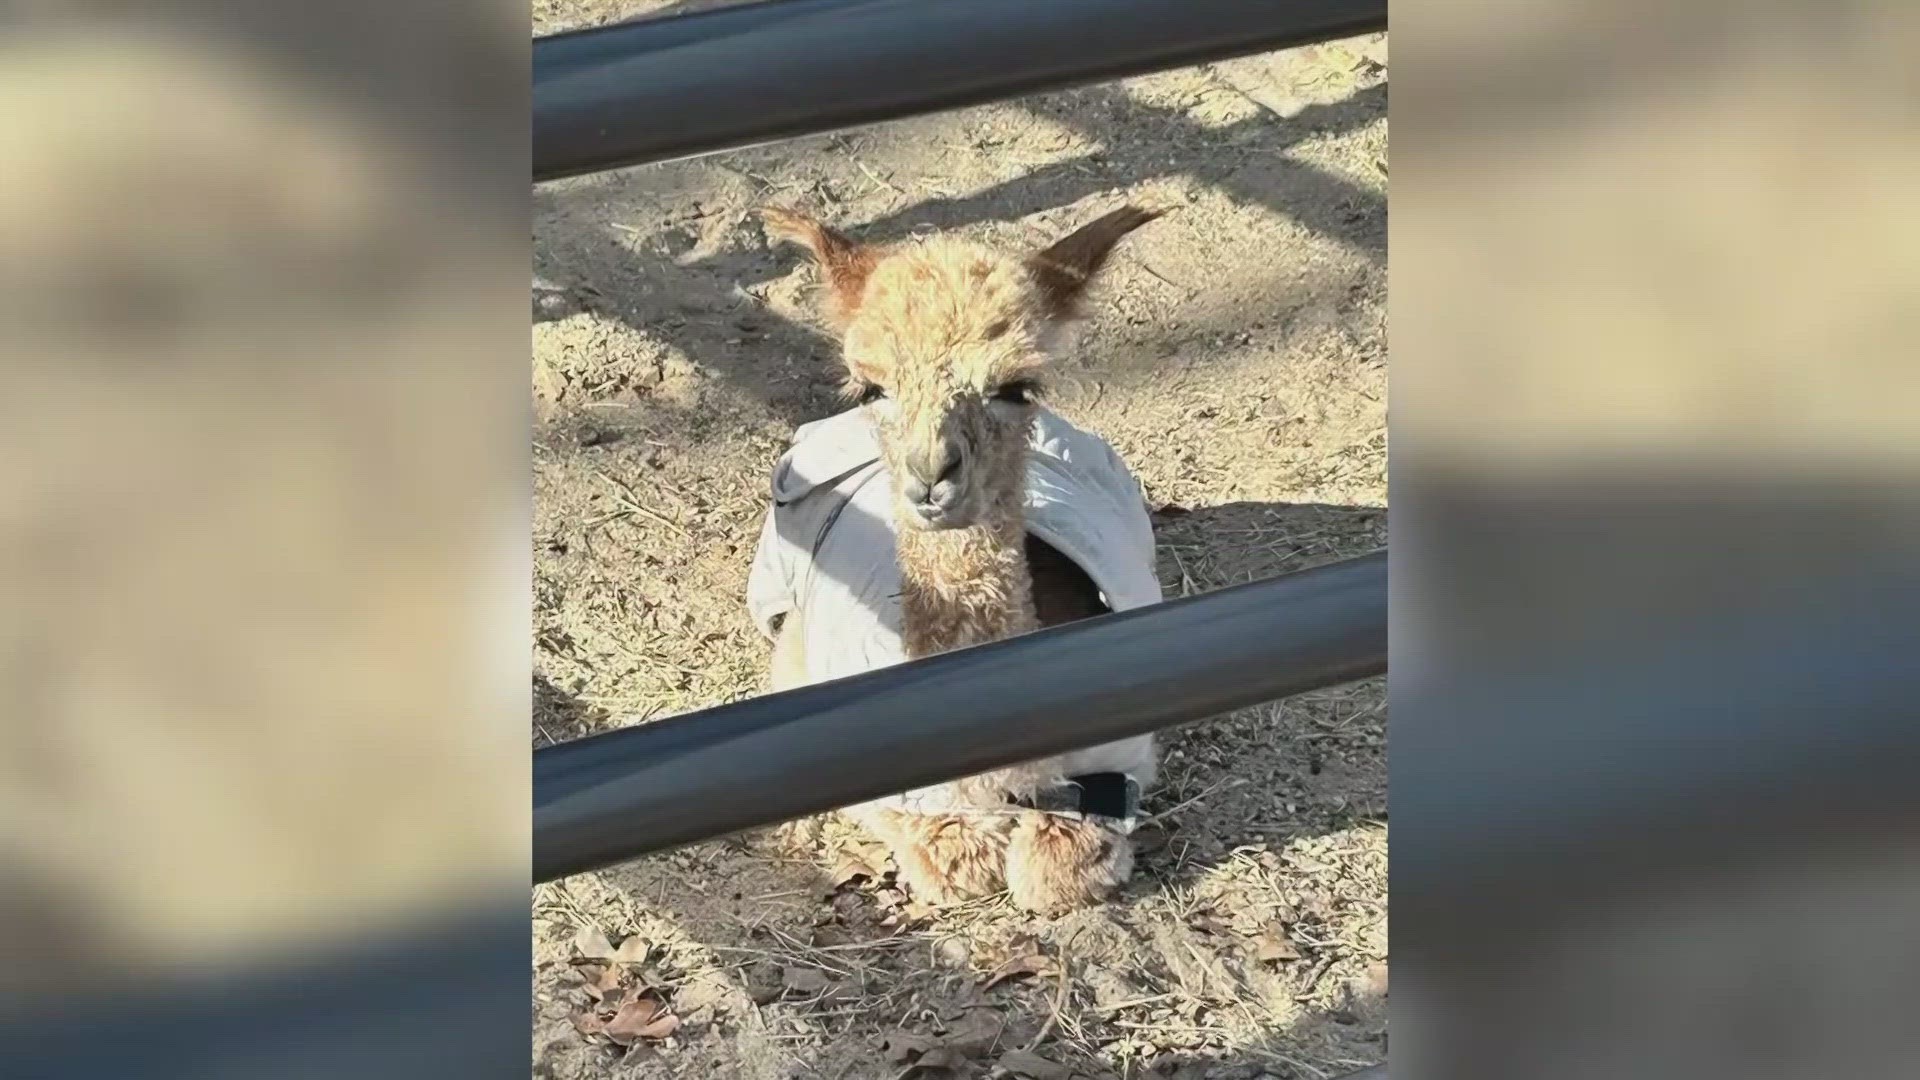 According to the owners, the baby alpaca is just a few days old.